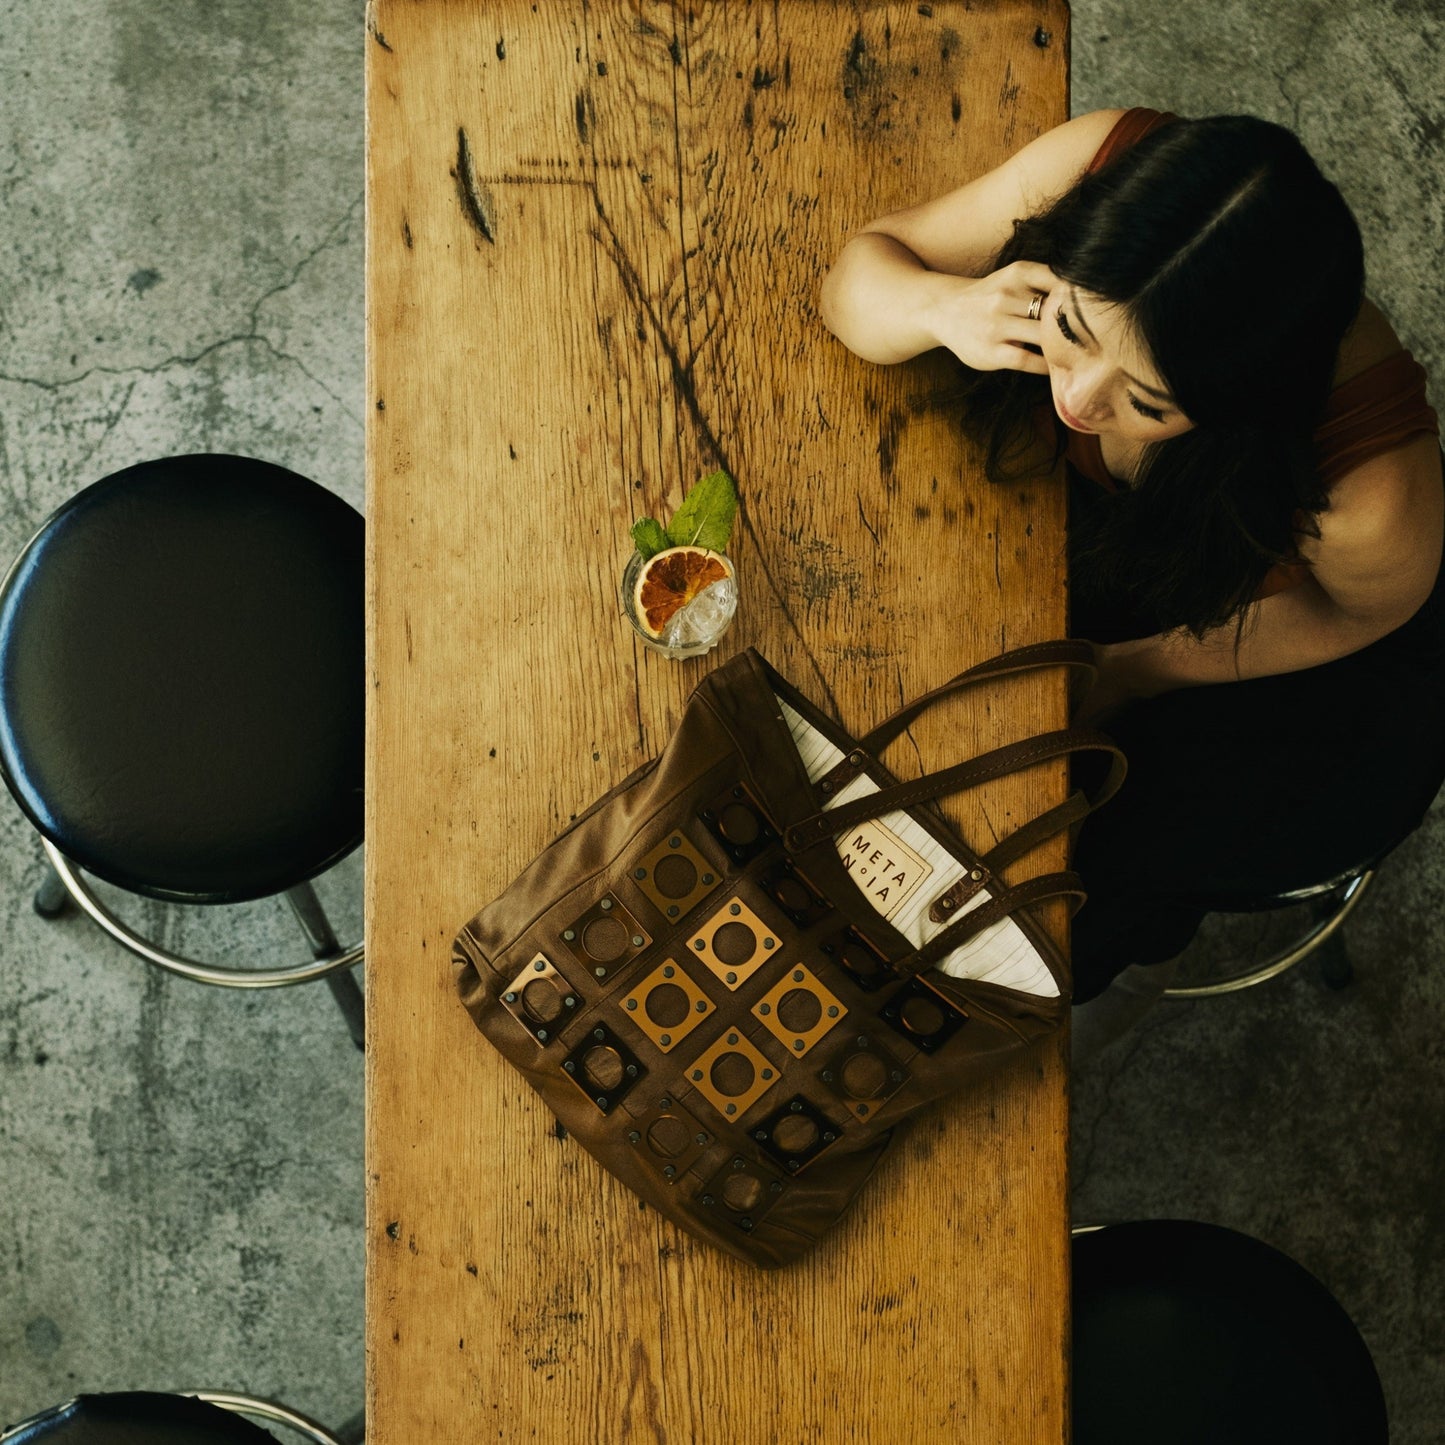 METANoIA caramel recycled leather medium handbag with square and hollowed circle copper acrylic forms fashioned into a repeative fashion. Model featured leaning over wooden bench with gin by her side and bag taken in birdseye view.